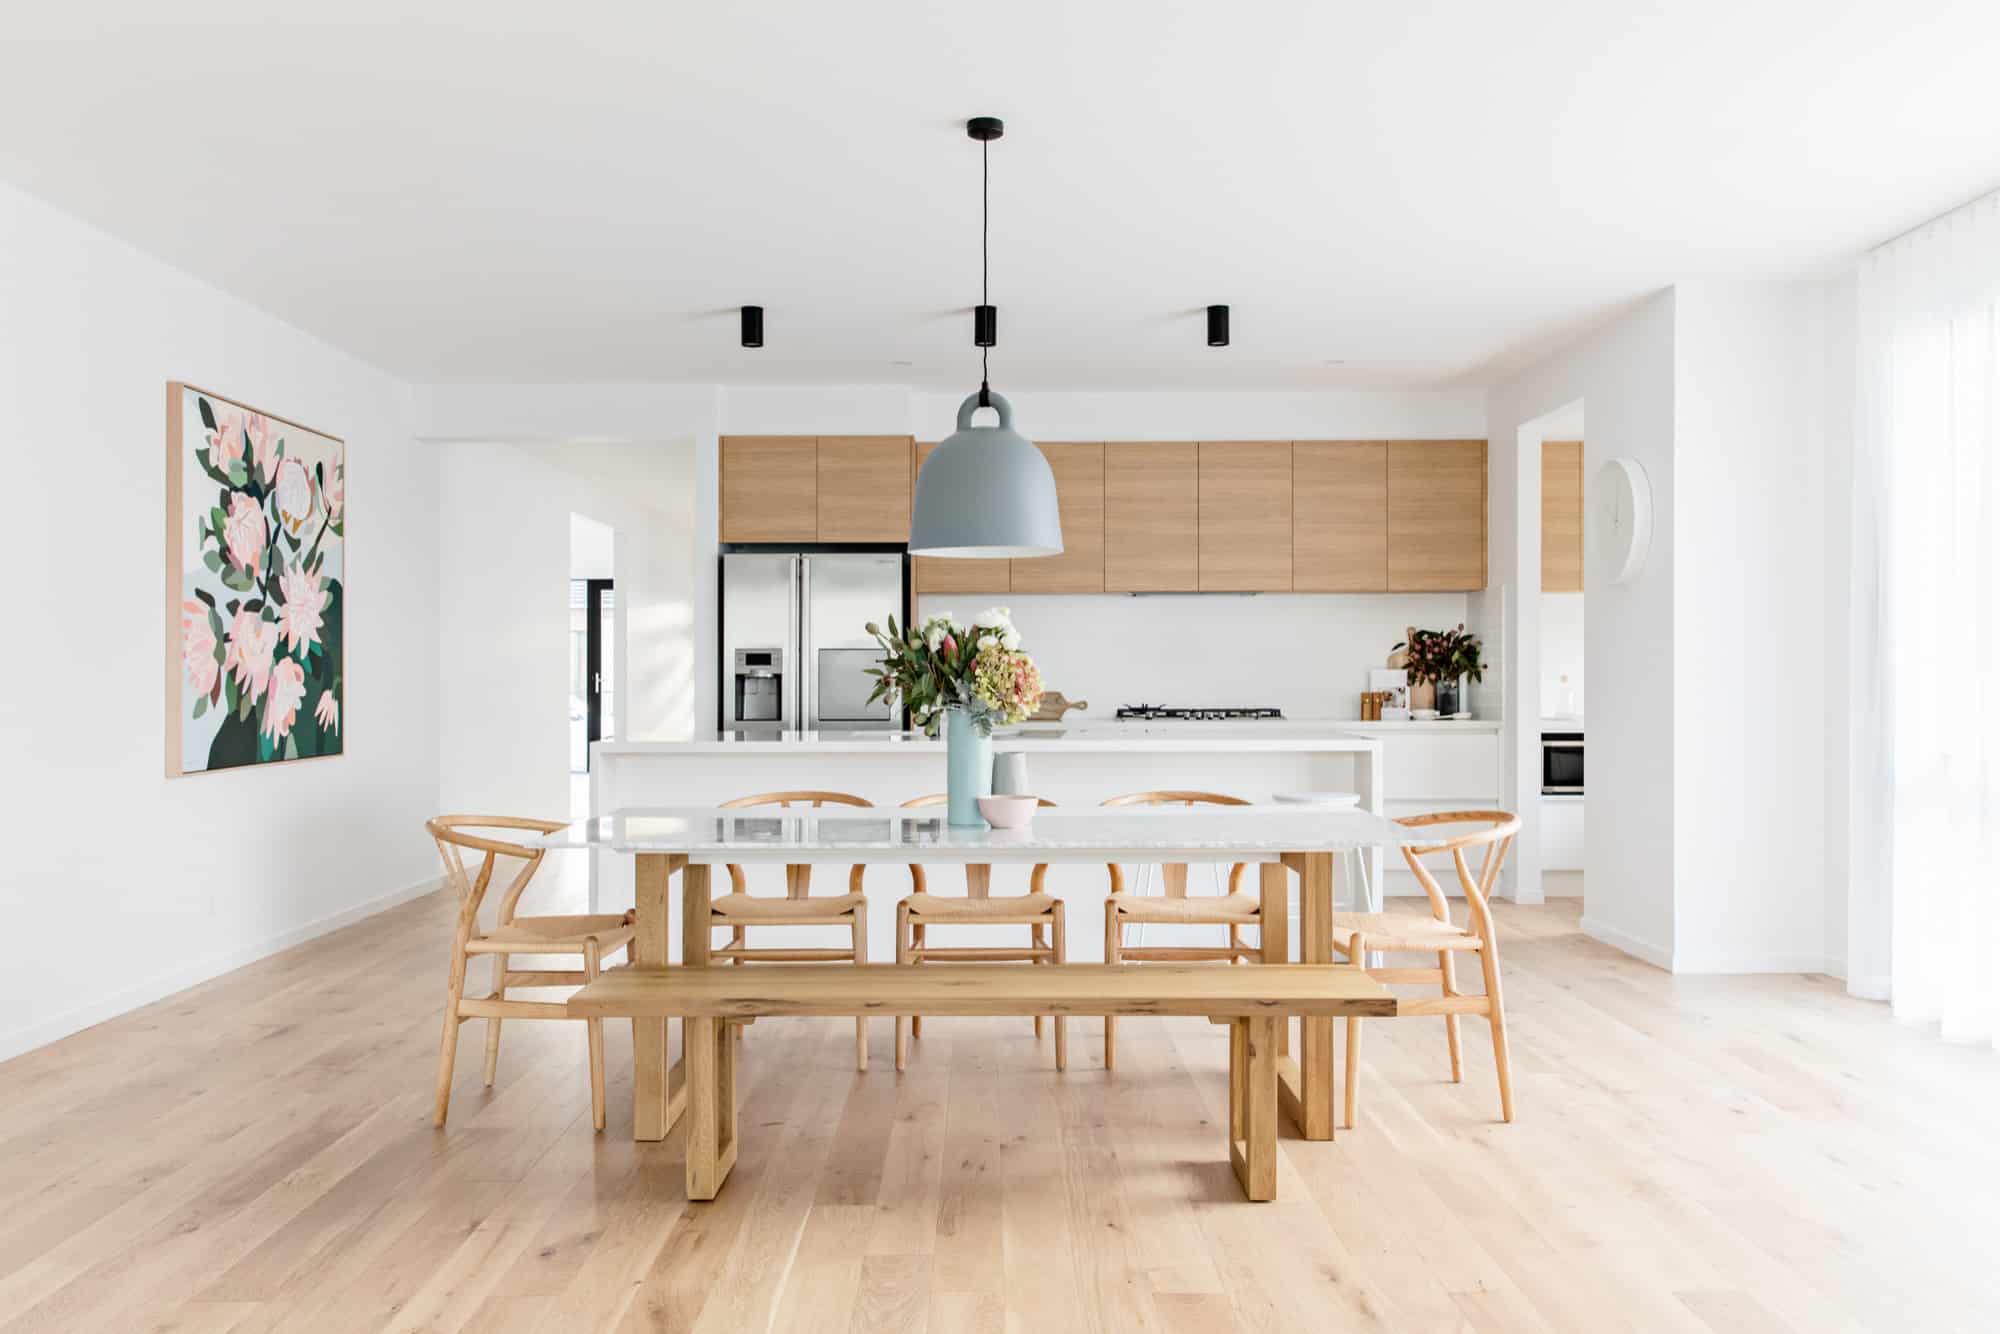 What Are the Pros and Cons of Opting for a Scandinavian Dining Room Design?